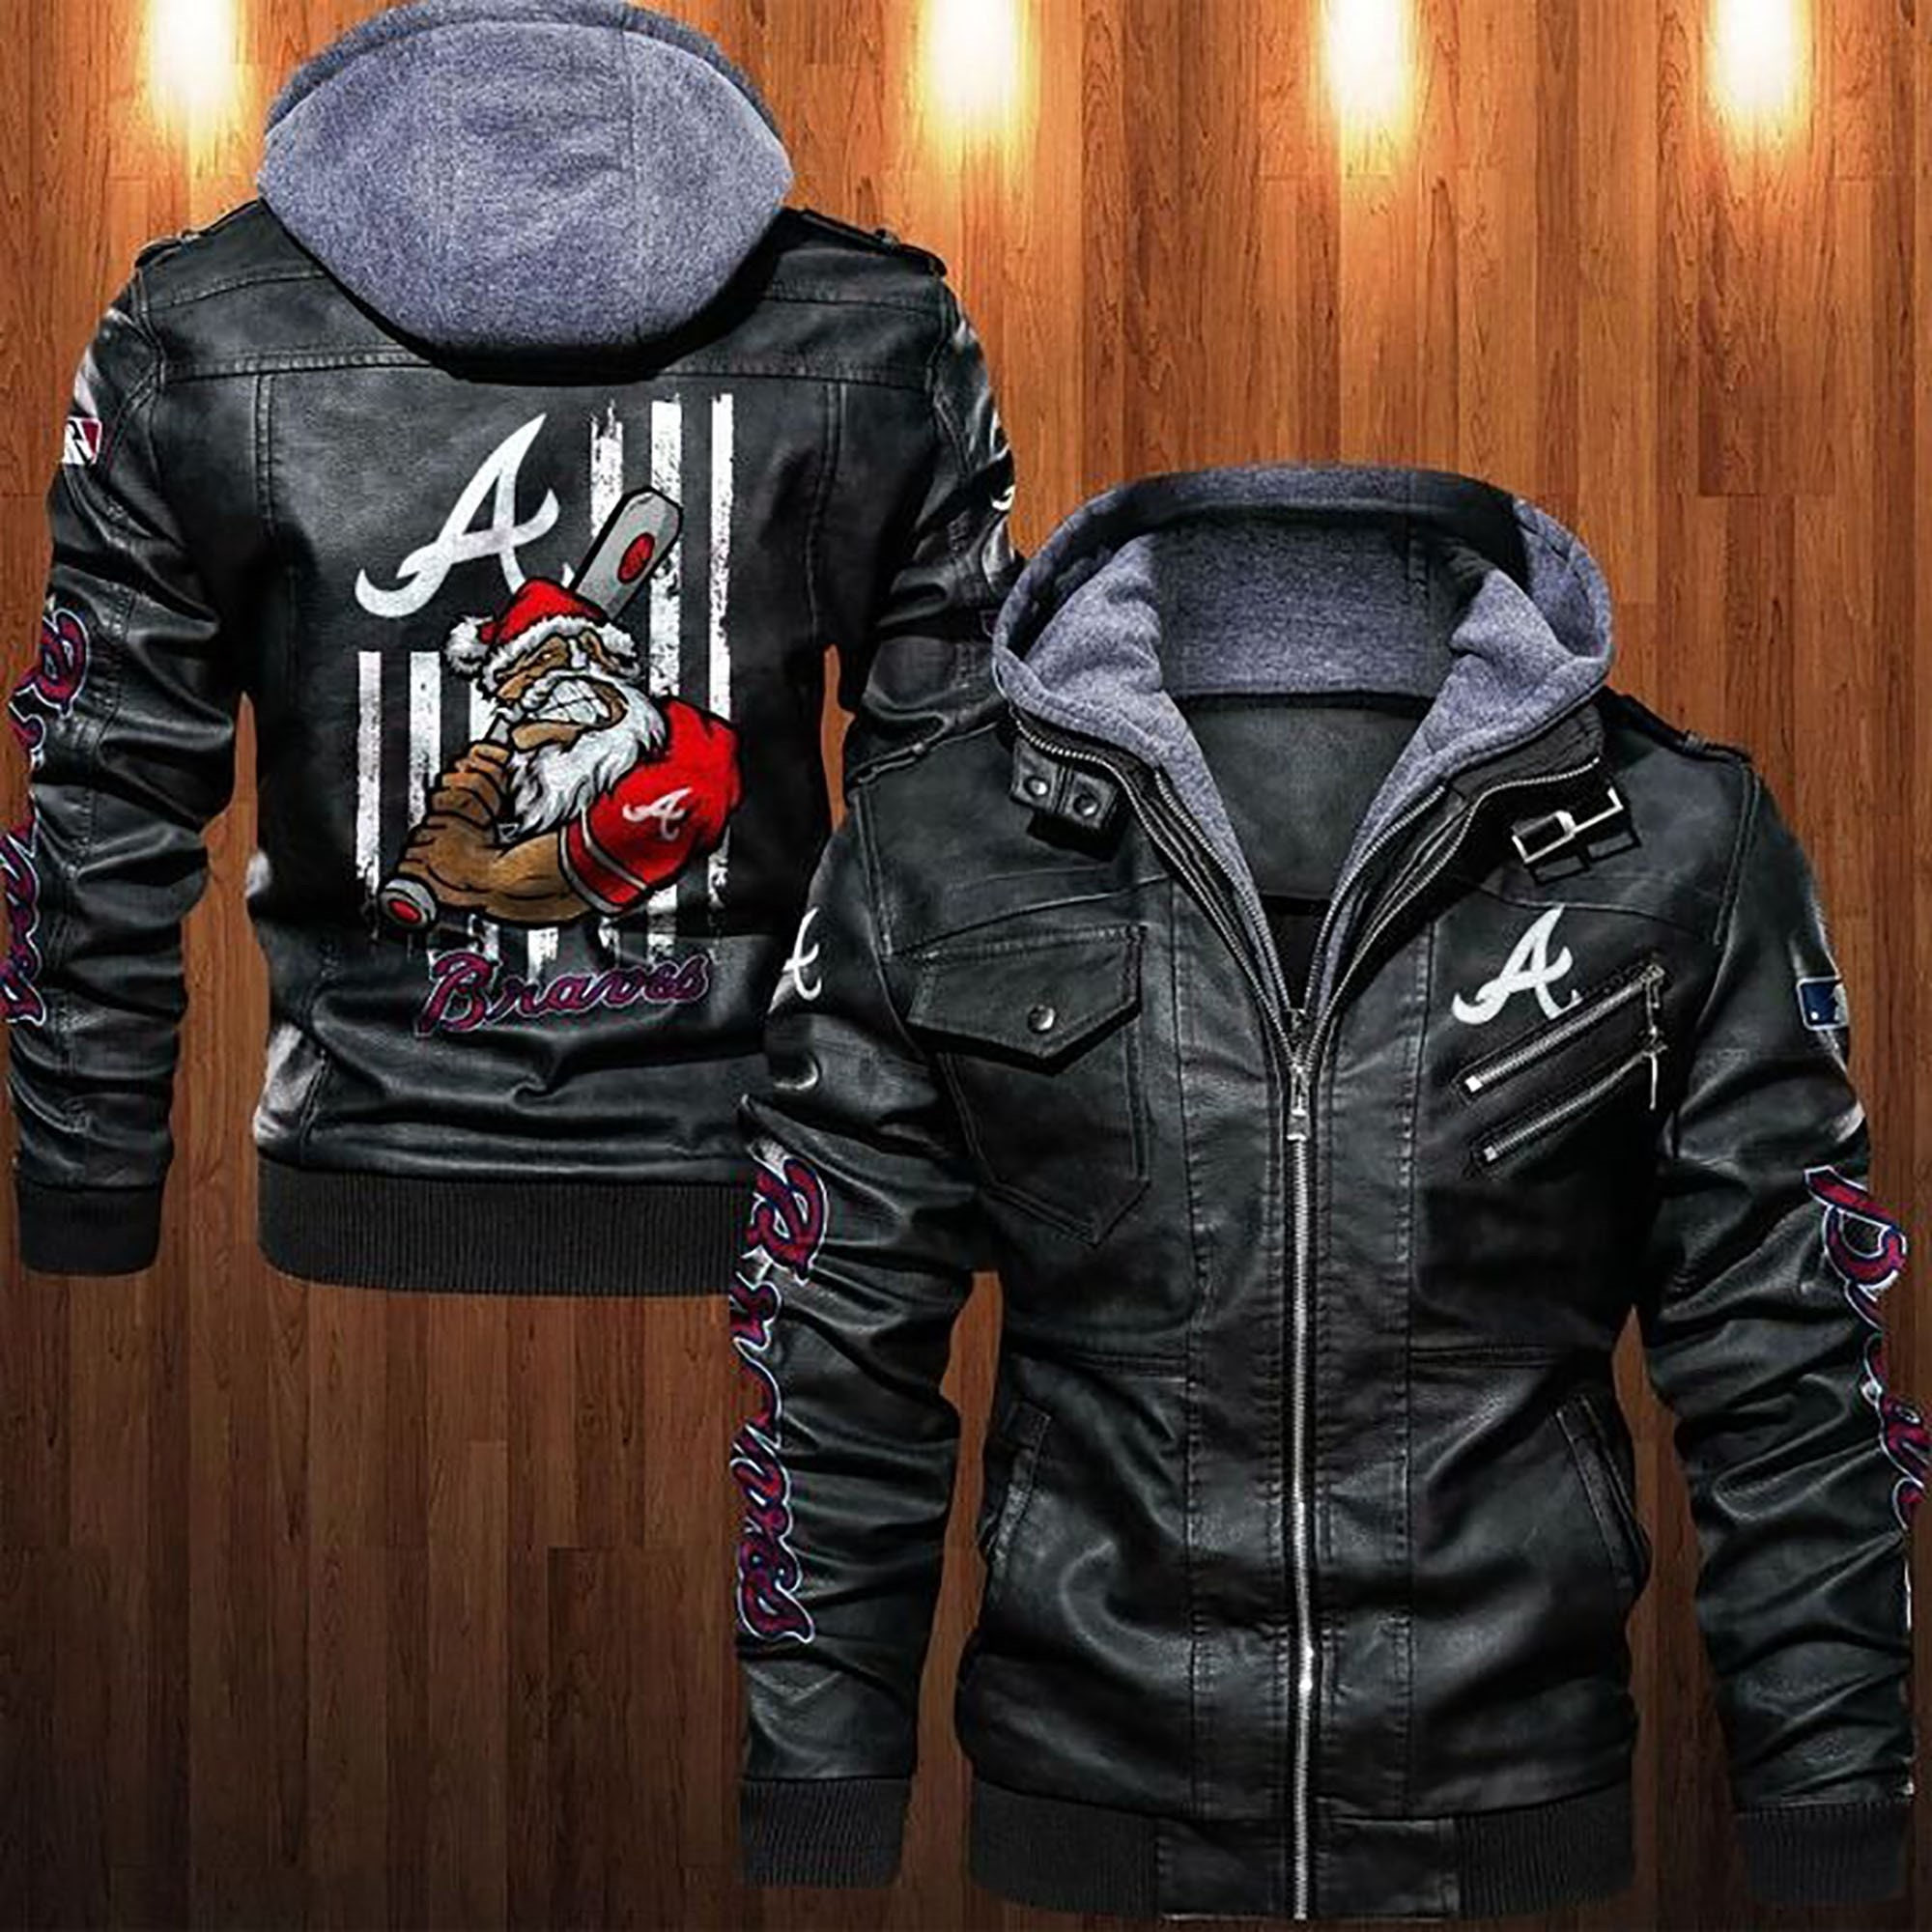 These Amazing Leather Jacket will add to the appeal of your outfit 11